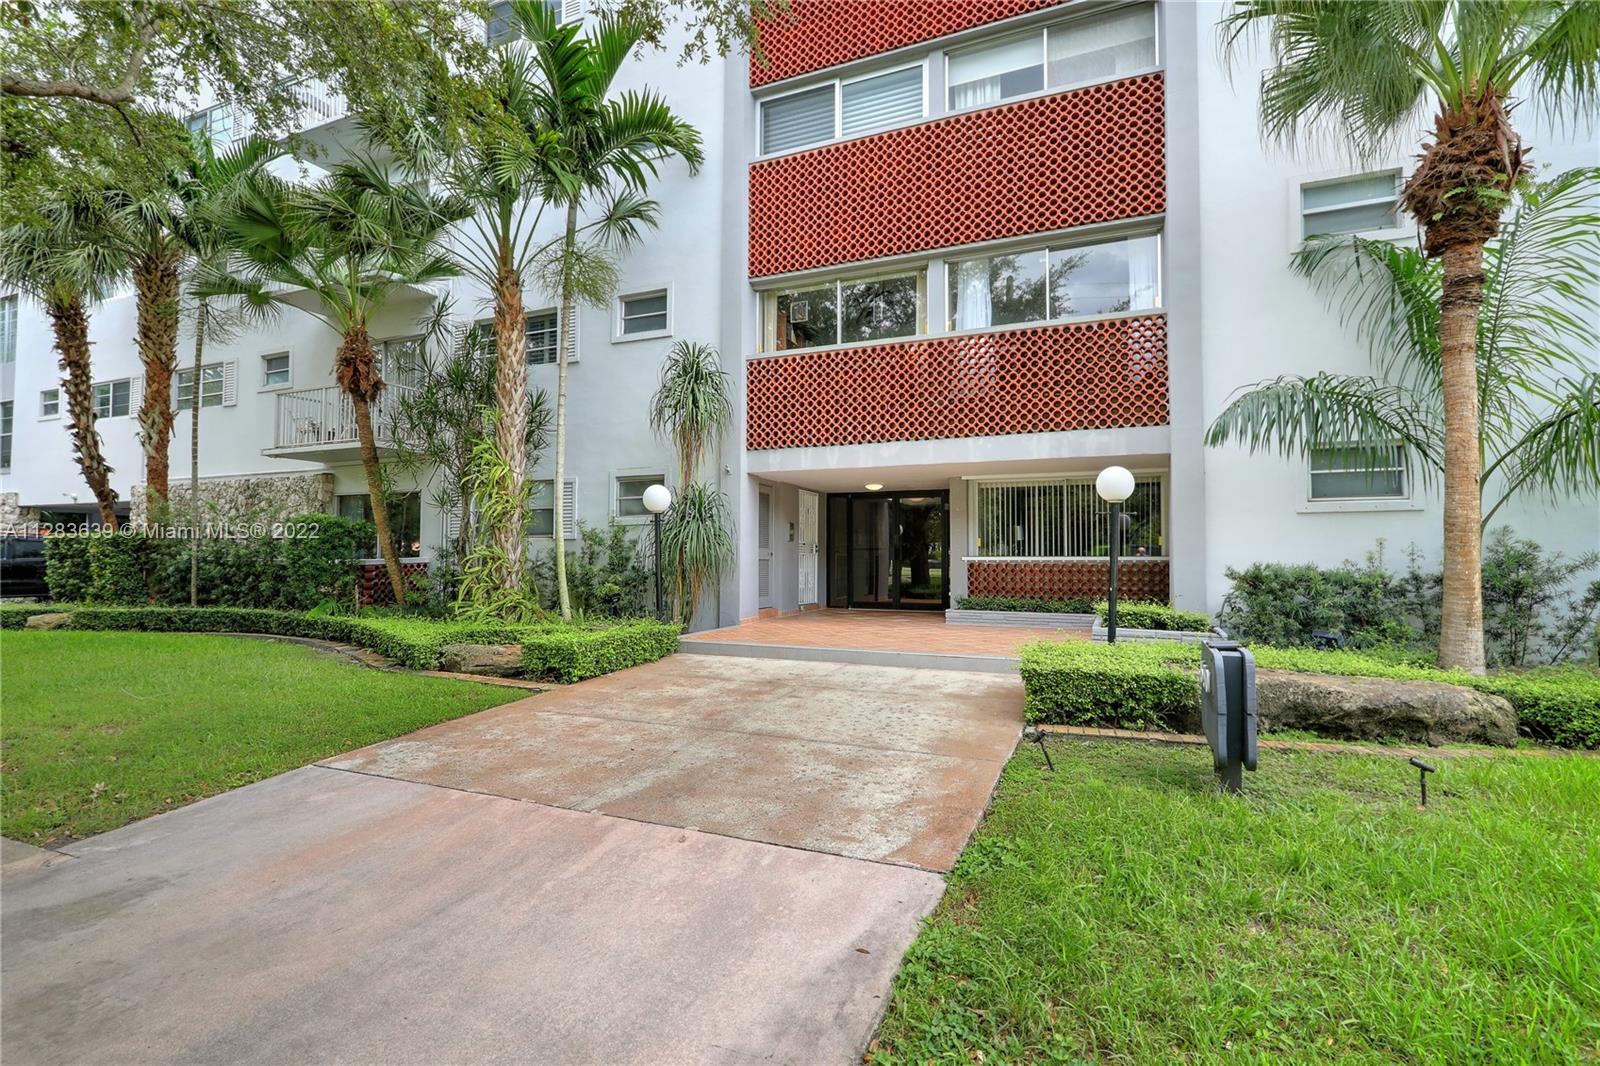 Central in Miami. A wonderful Coral Gables location. Across from the Granada Golf Course. Apt with a great balcony !